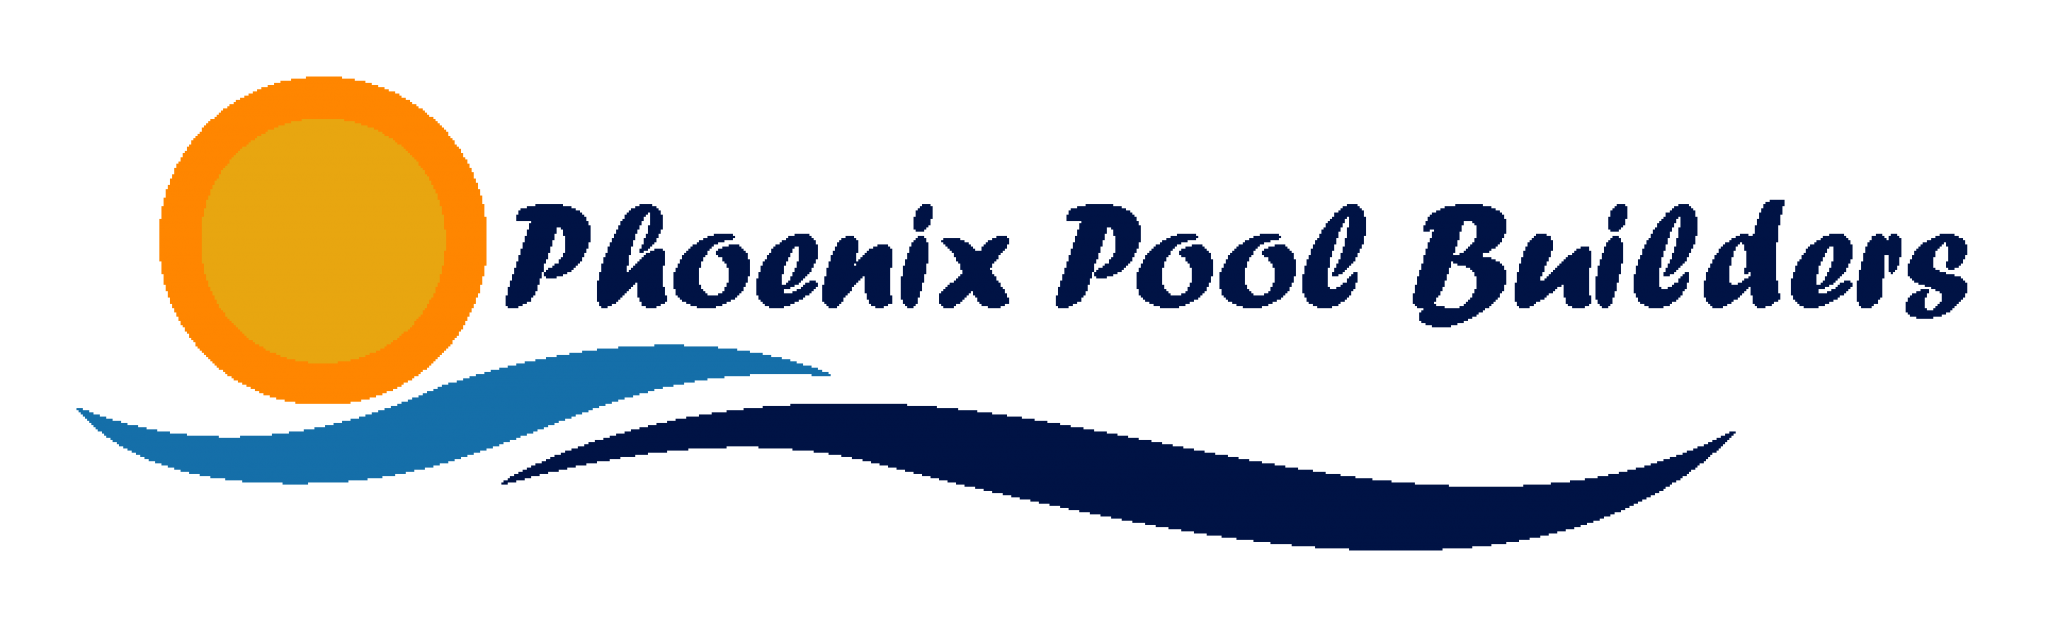 Phoenix Pool Builders Has a Reputation of Using the Best Quality Pool Installation Materials – Press Release